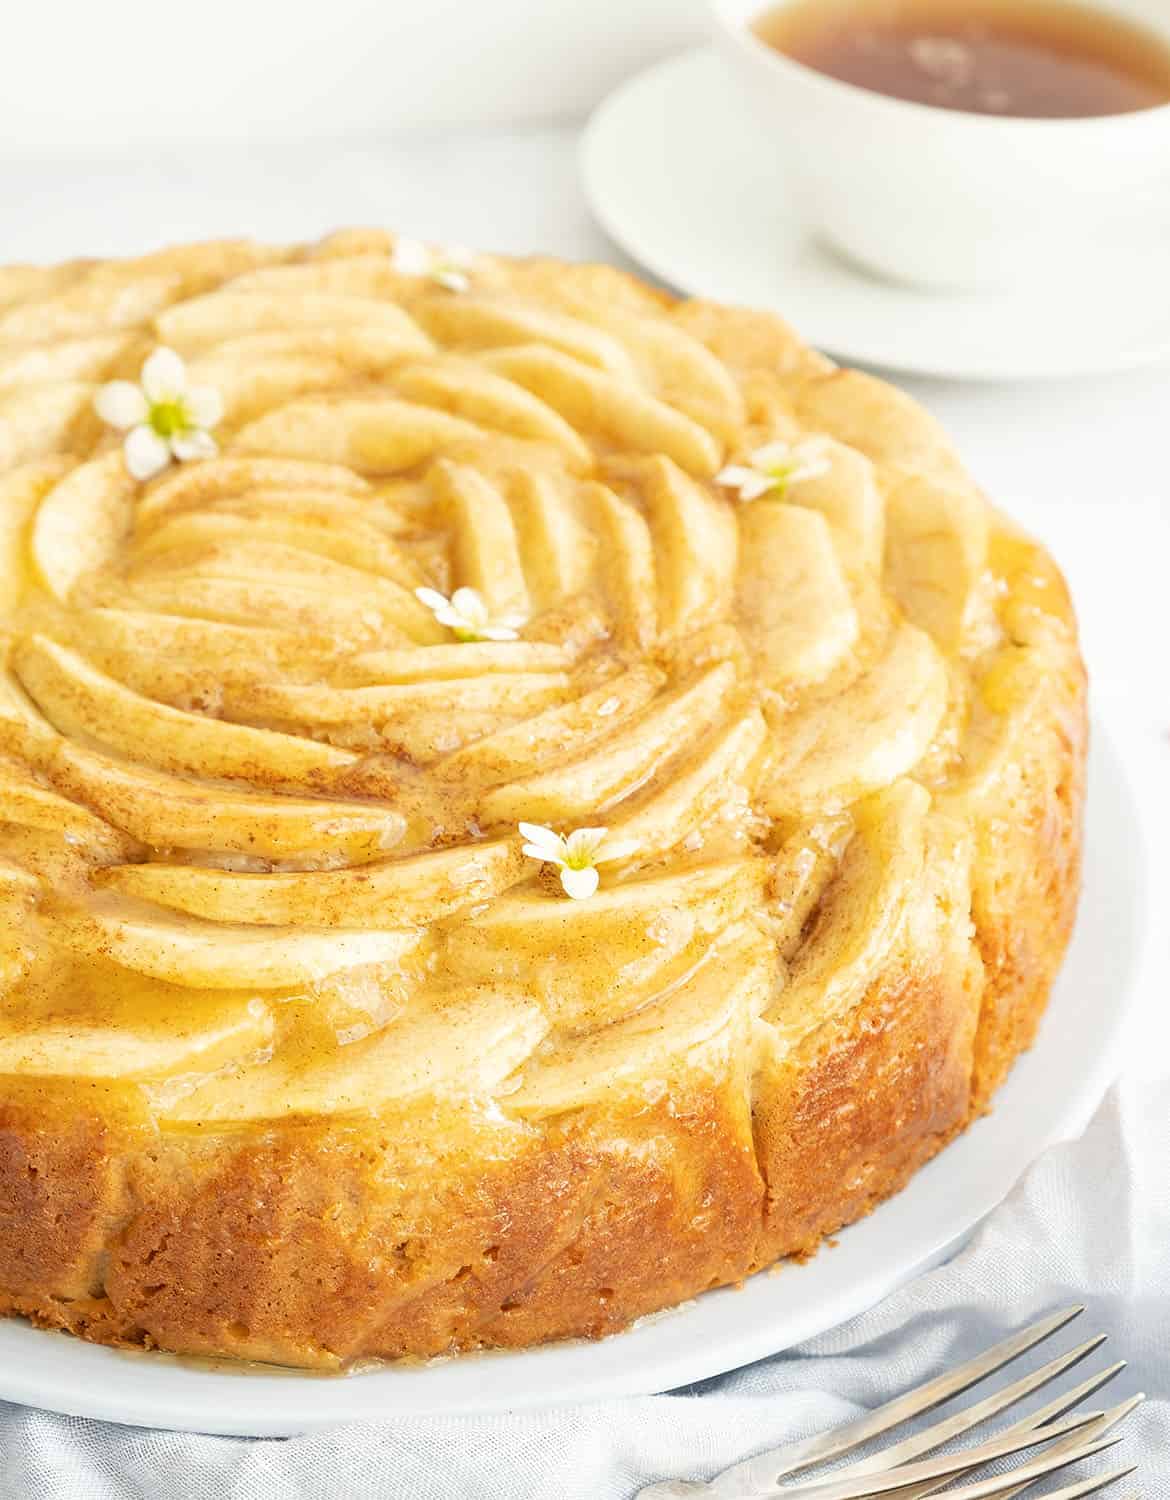 A close-up of a round apple cake decorated with small white flowers, a cup of tea in the background.